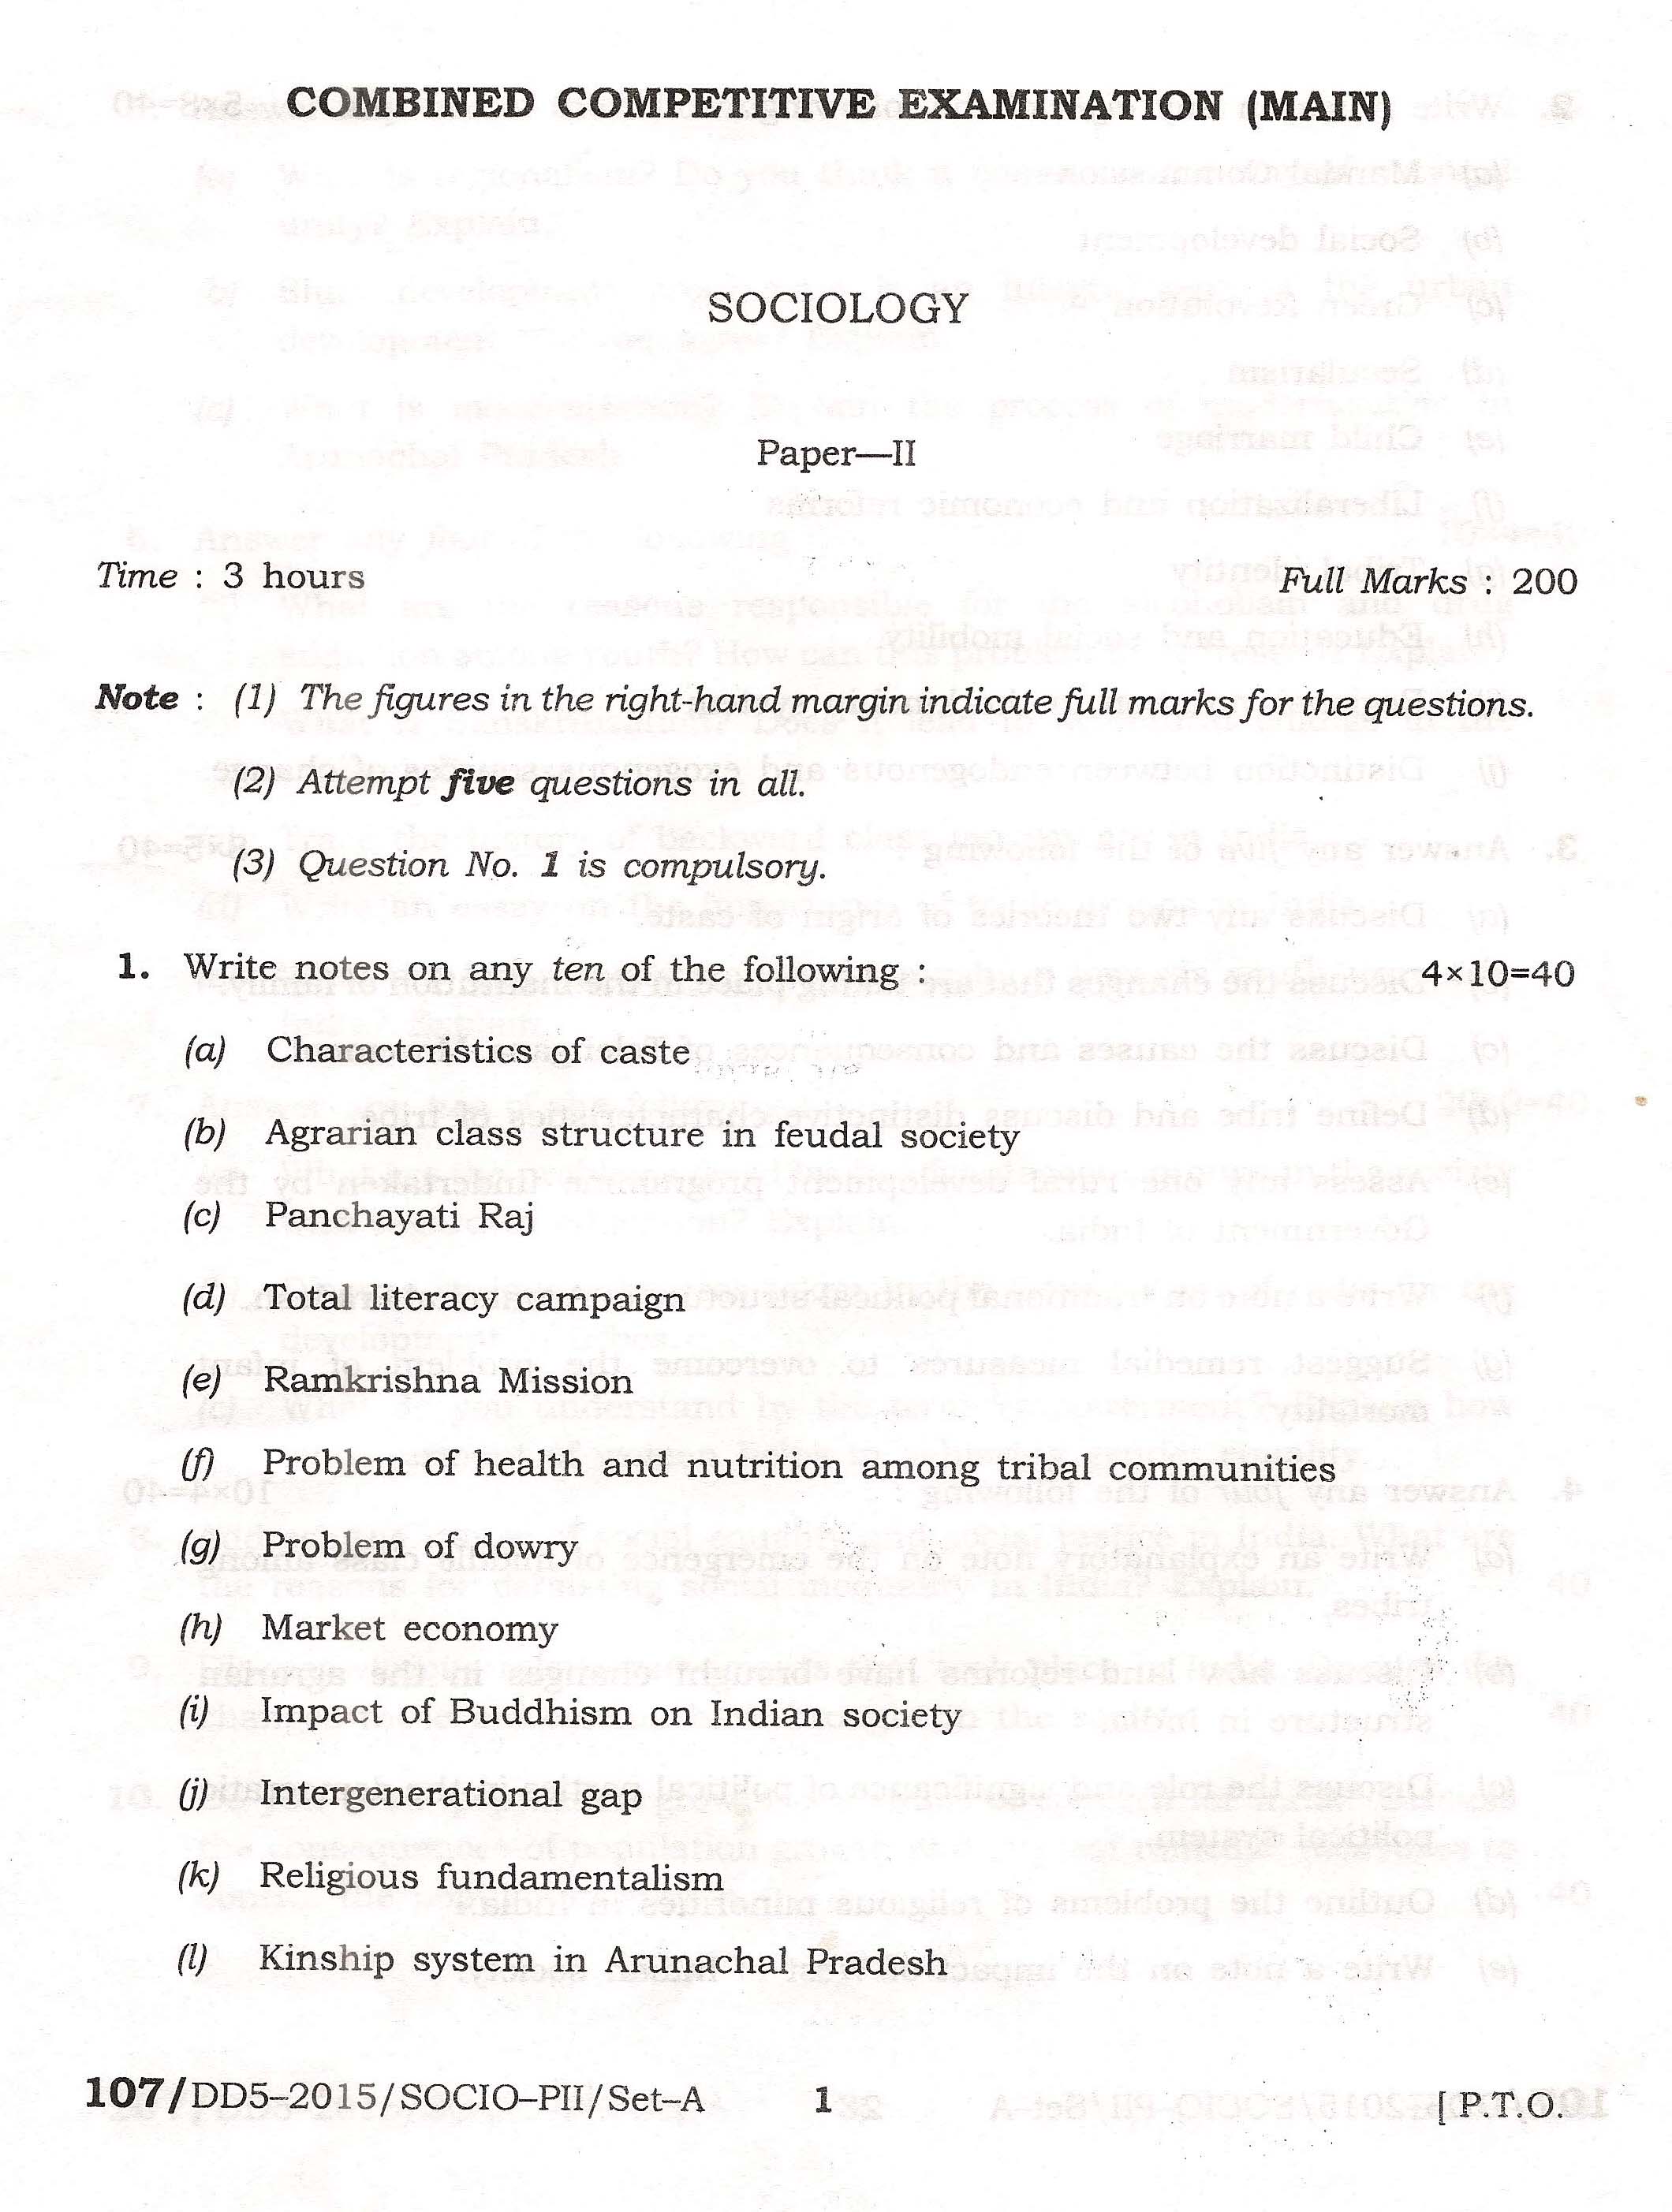 APPSC Combined Competitive Main Exam 2015 Sociology Paper II 1